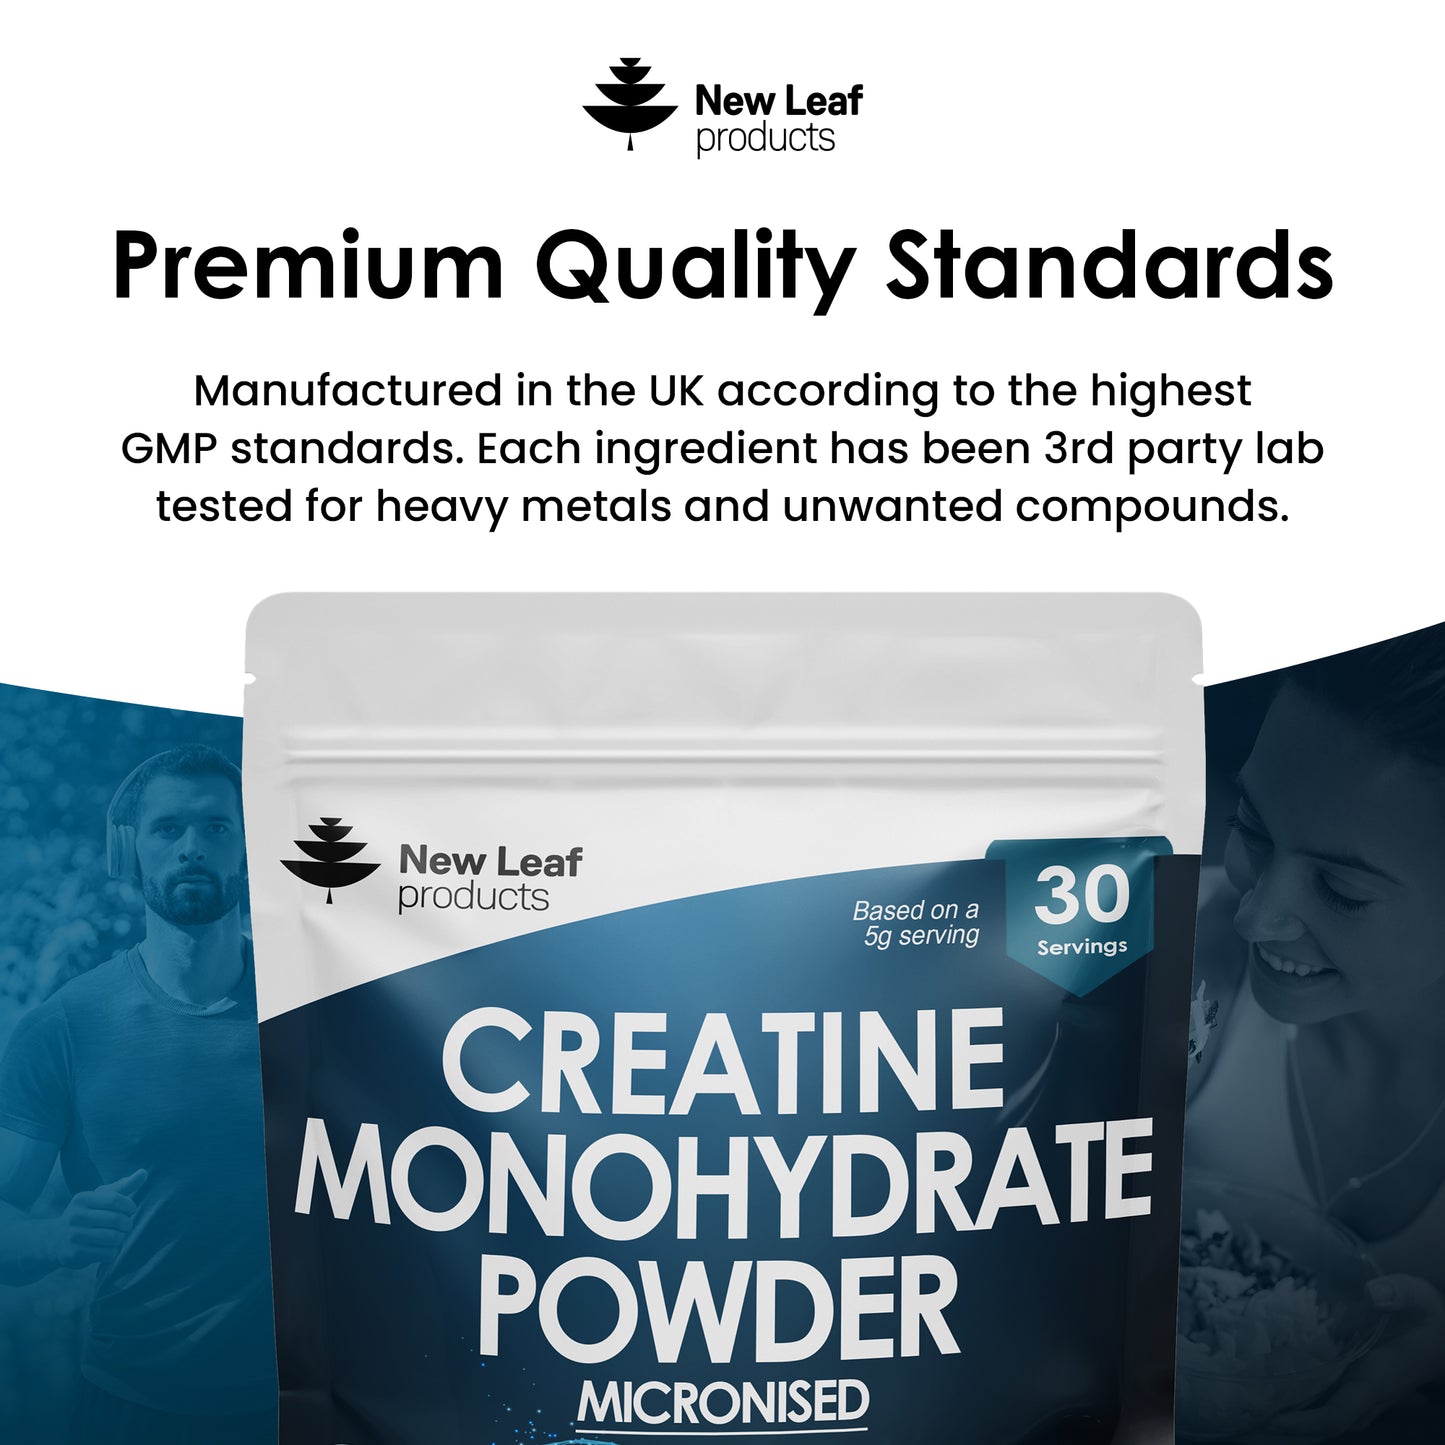 Creatine Monohydrate Powder 150g of Micronized Creatine for easy mixing - pre/post workout gym supplements